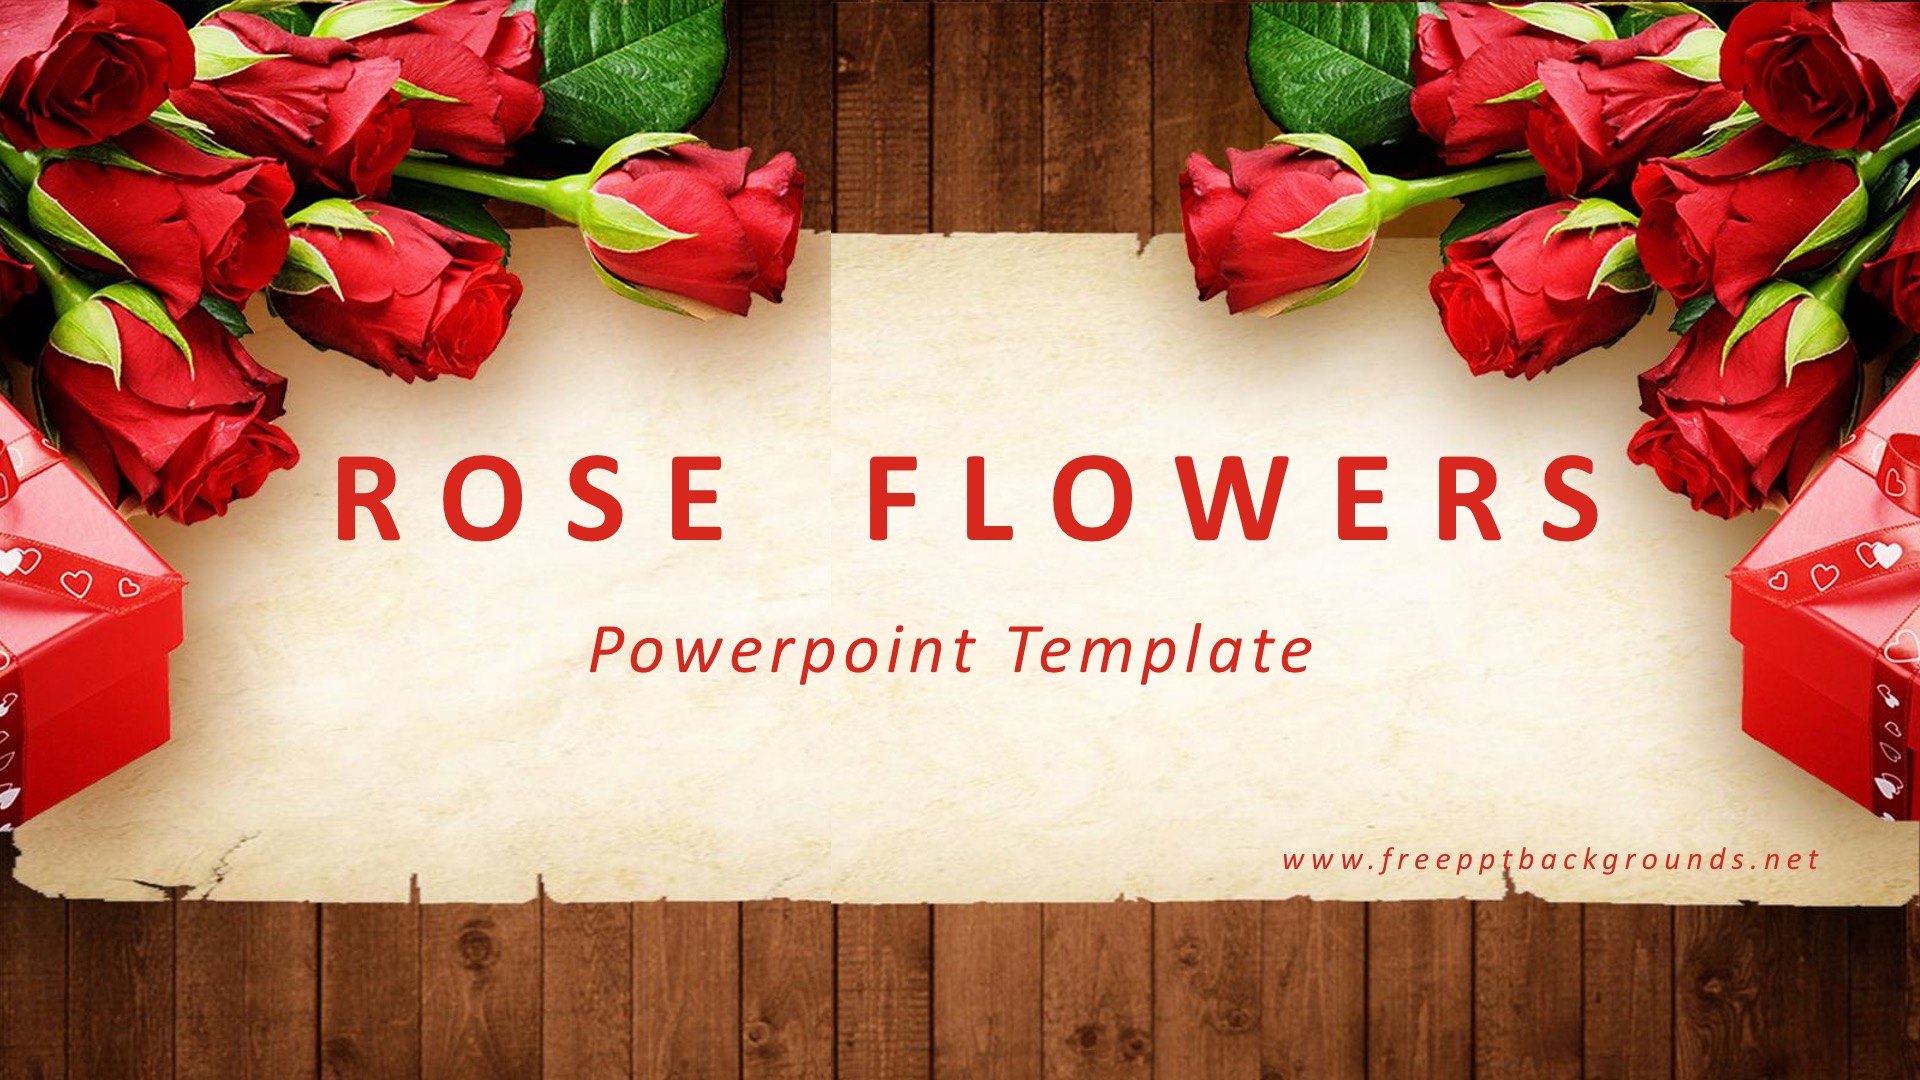 Rose Flower Powerpoint Templates Border Frames Flowers Red Free